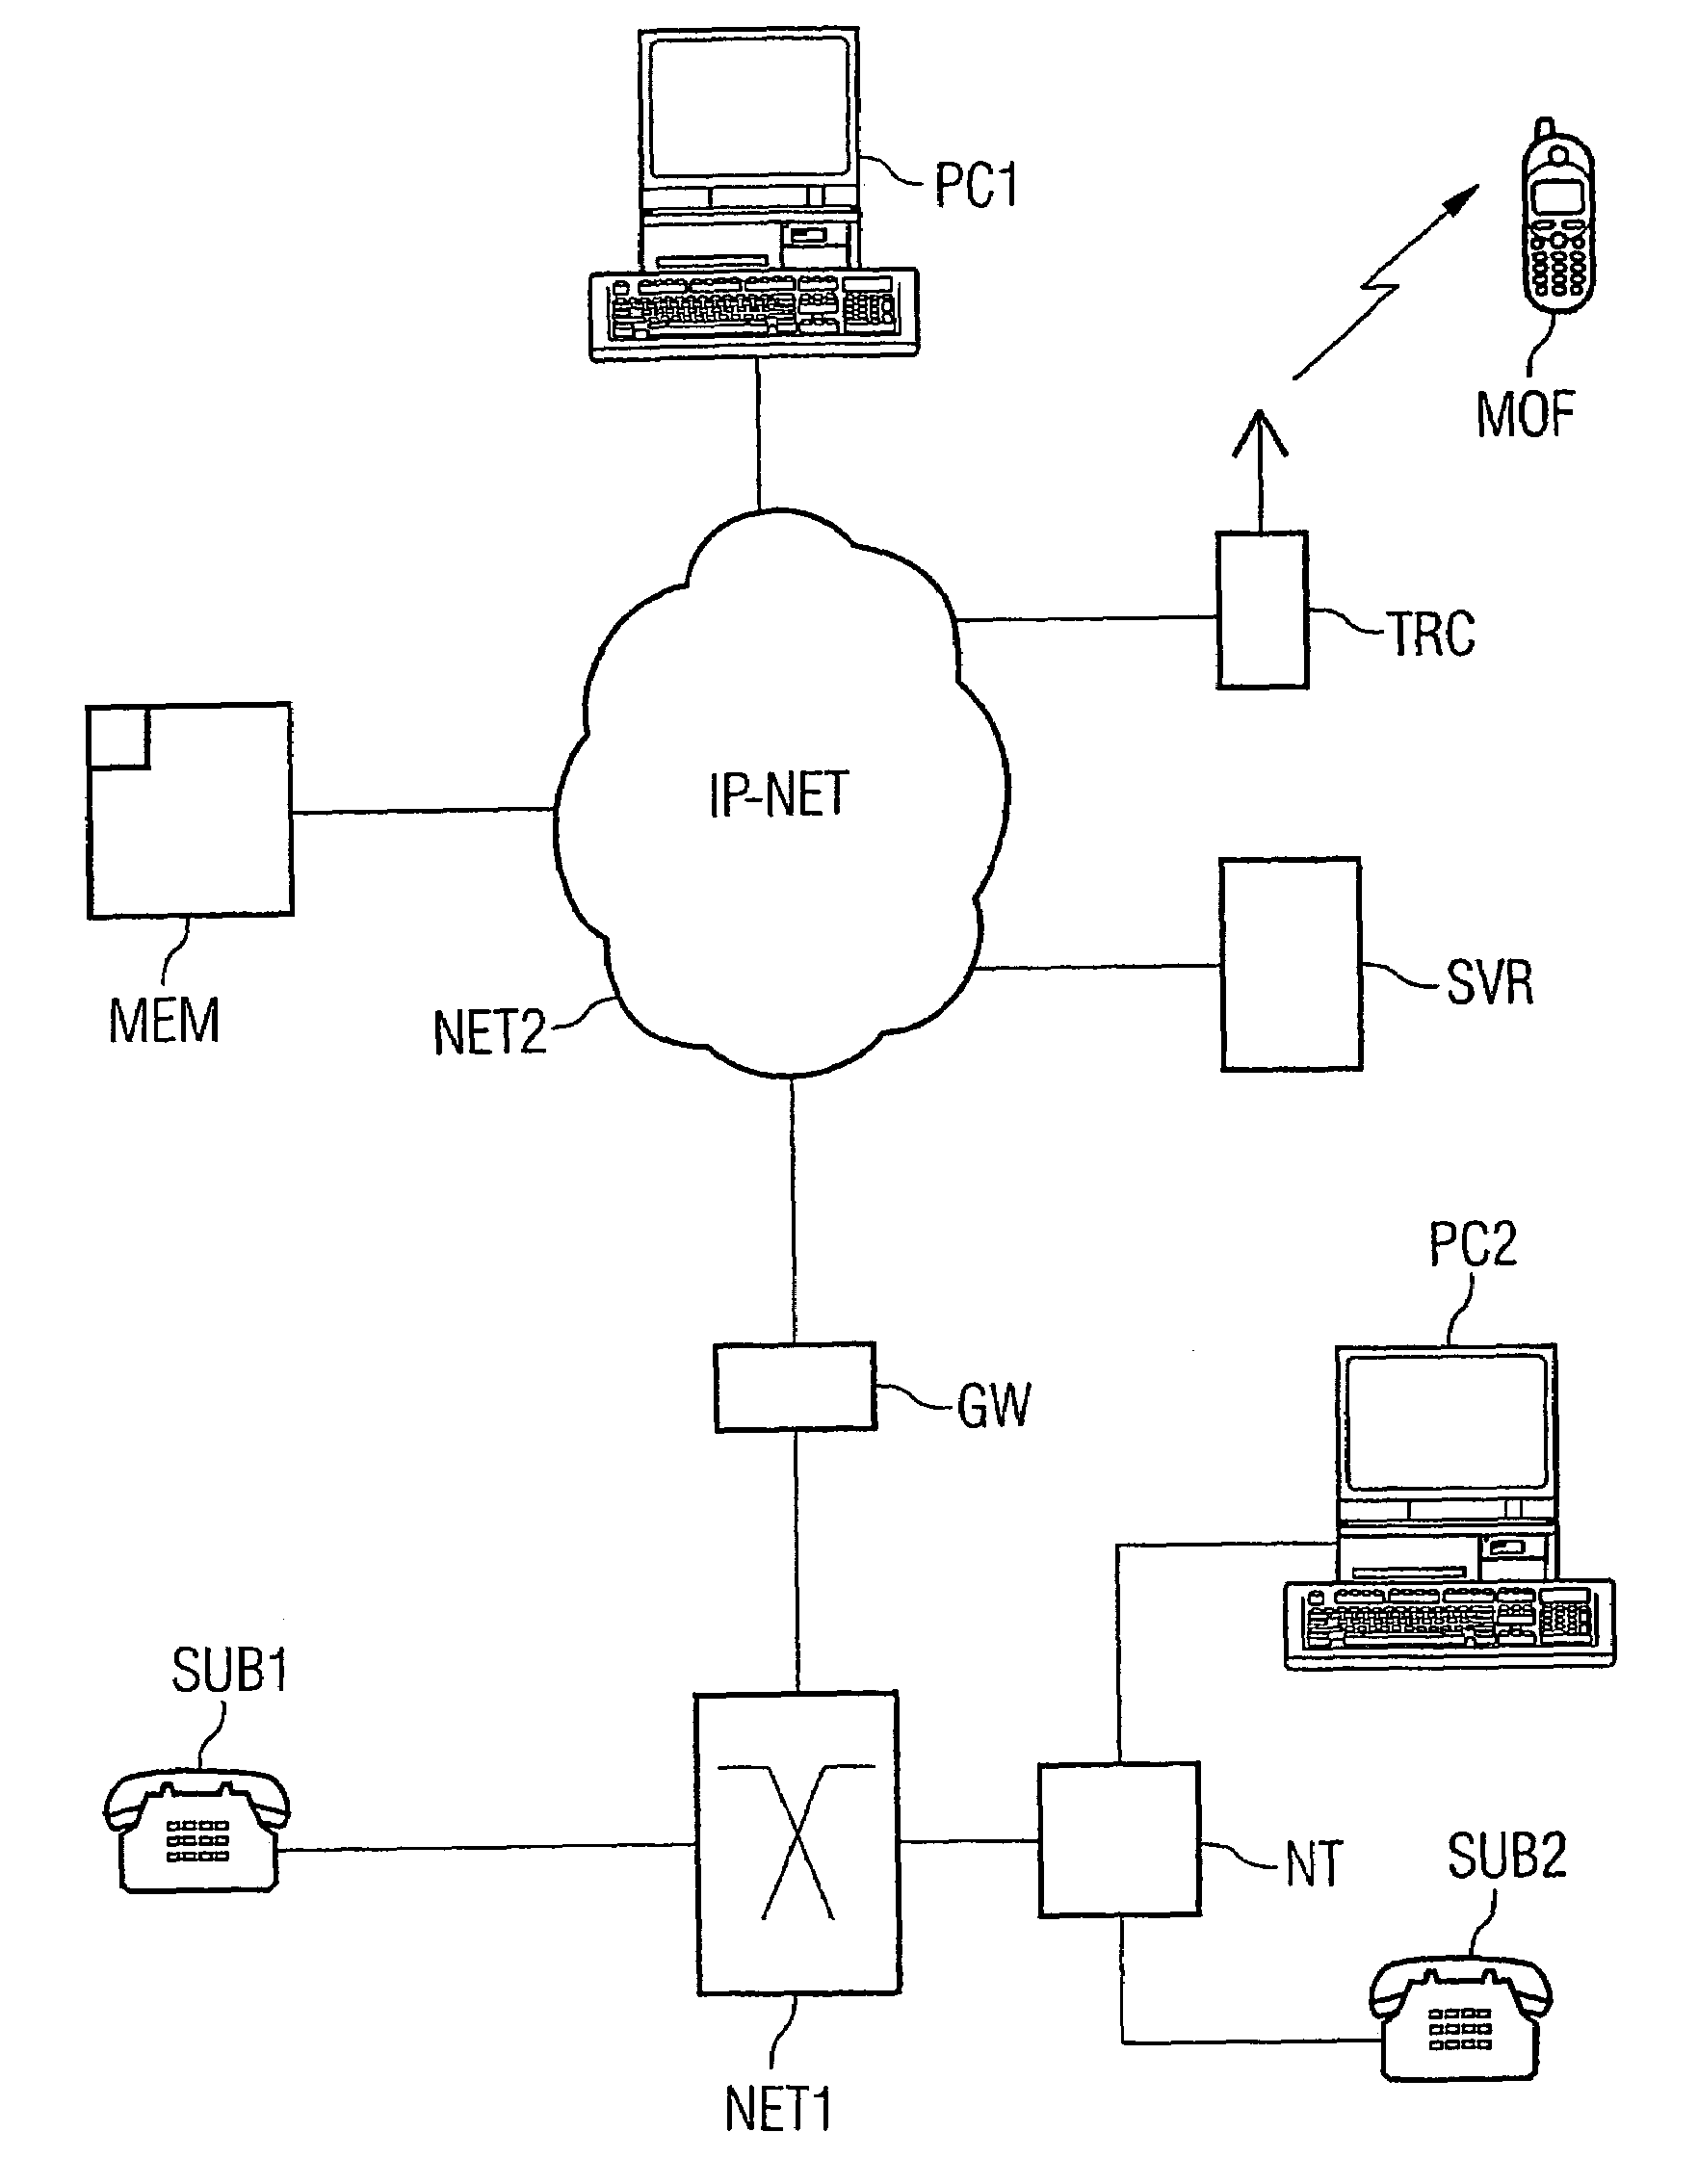 Method for expediting a short message via a server when a communication participant of a communication network is not available